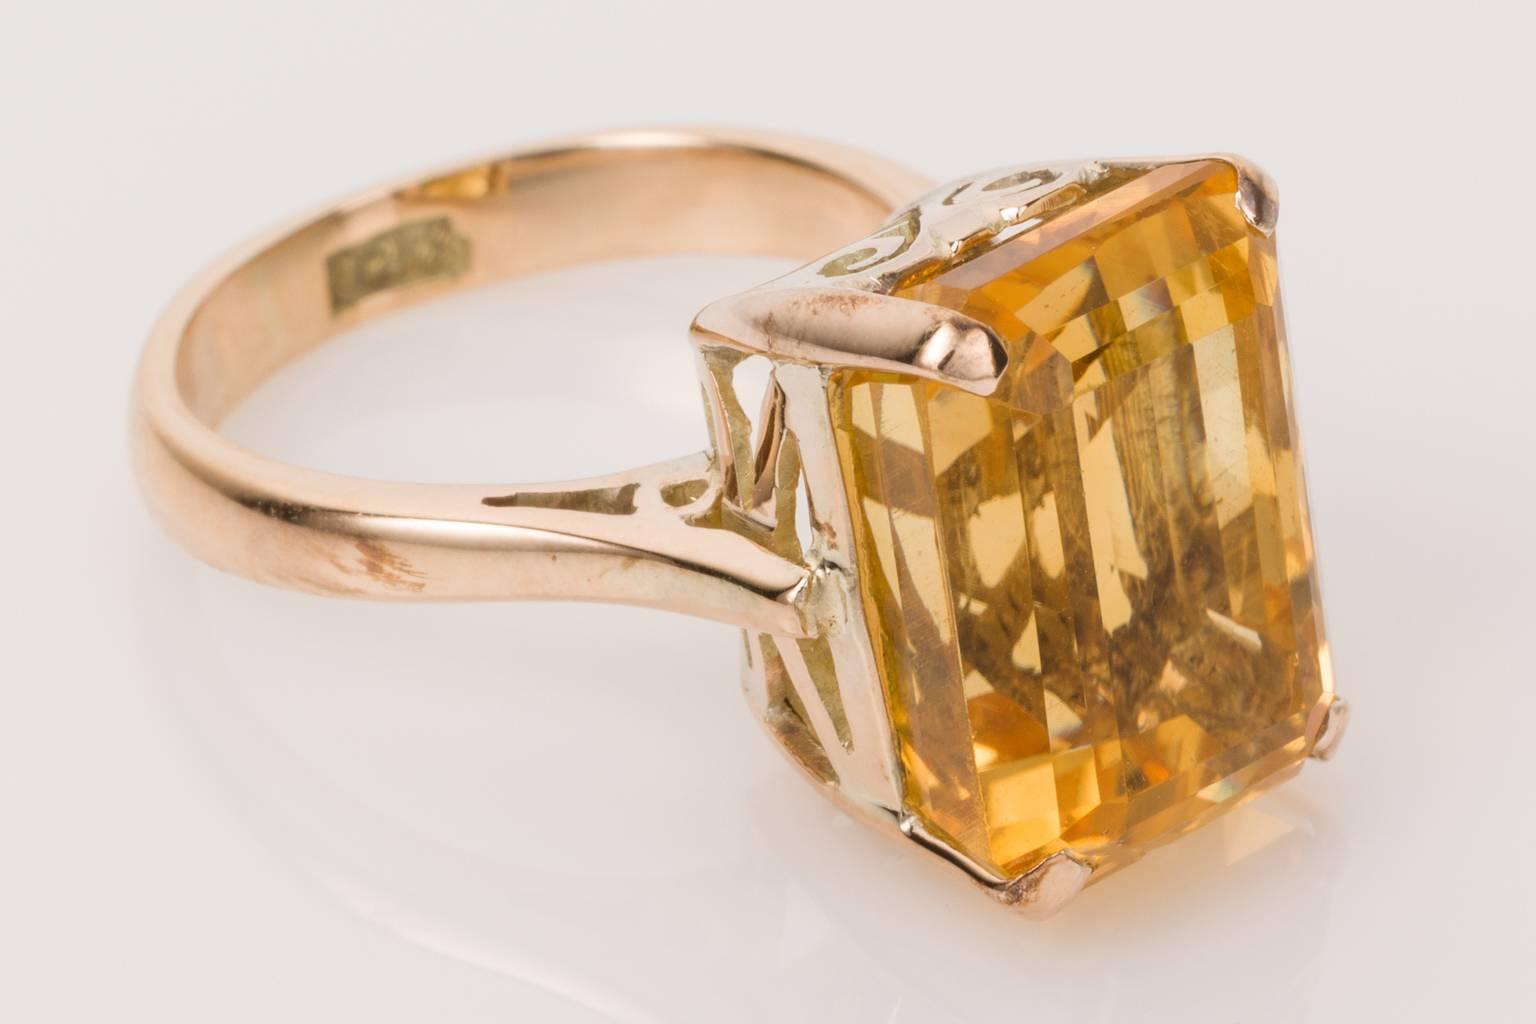 Golden Citrine, such a wonderful statement on the hand. This impressive 14 carat yellow gold ring has a beautiful emerald cut citrine at its centre. A deep cut gemstone showing gorgeous tones of gold and yellow. The estimated weight of the citrine